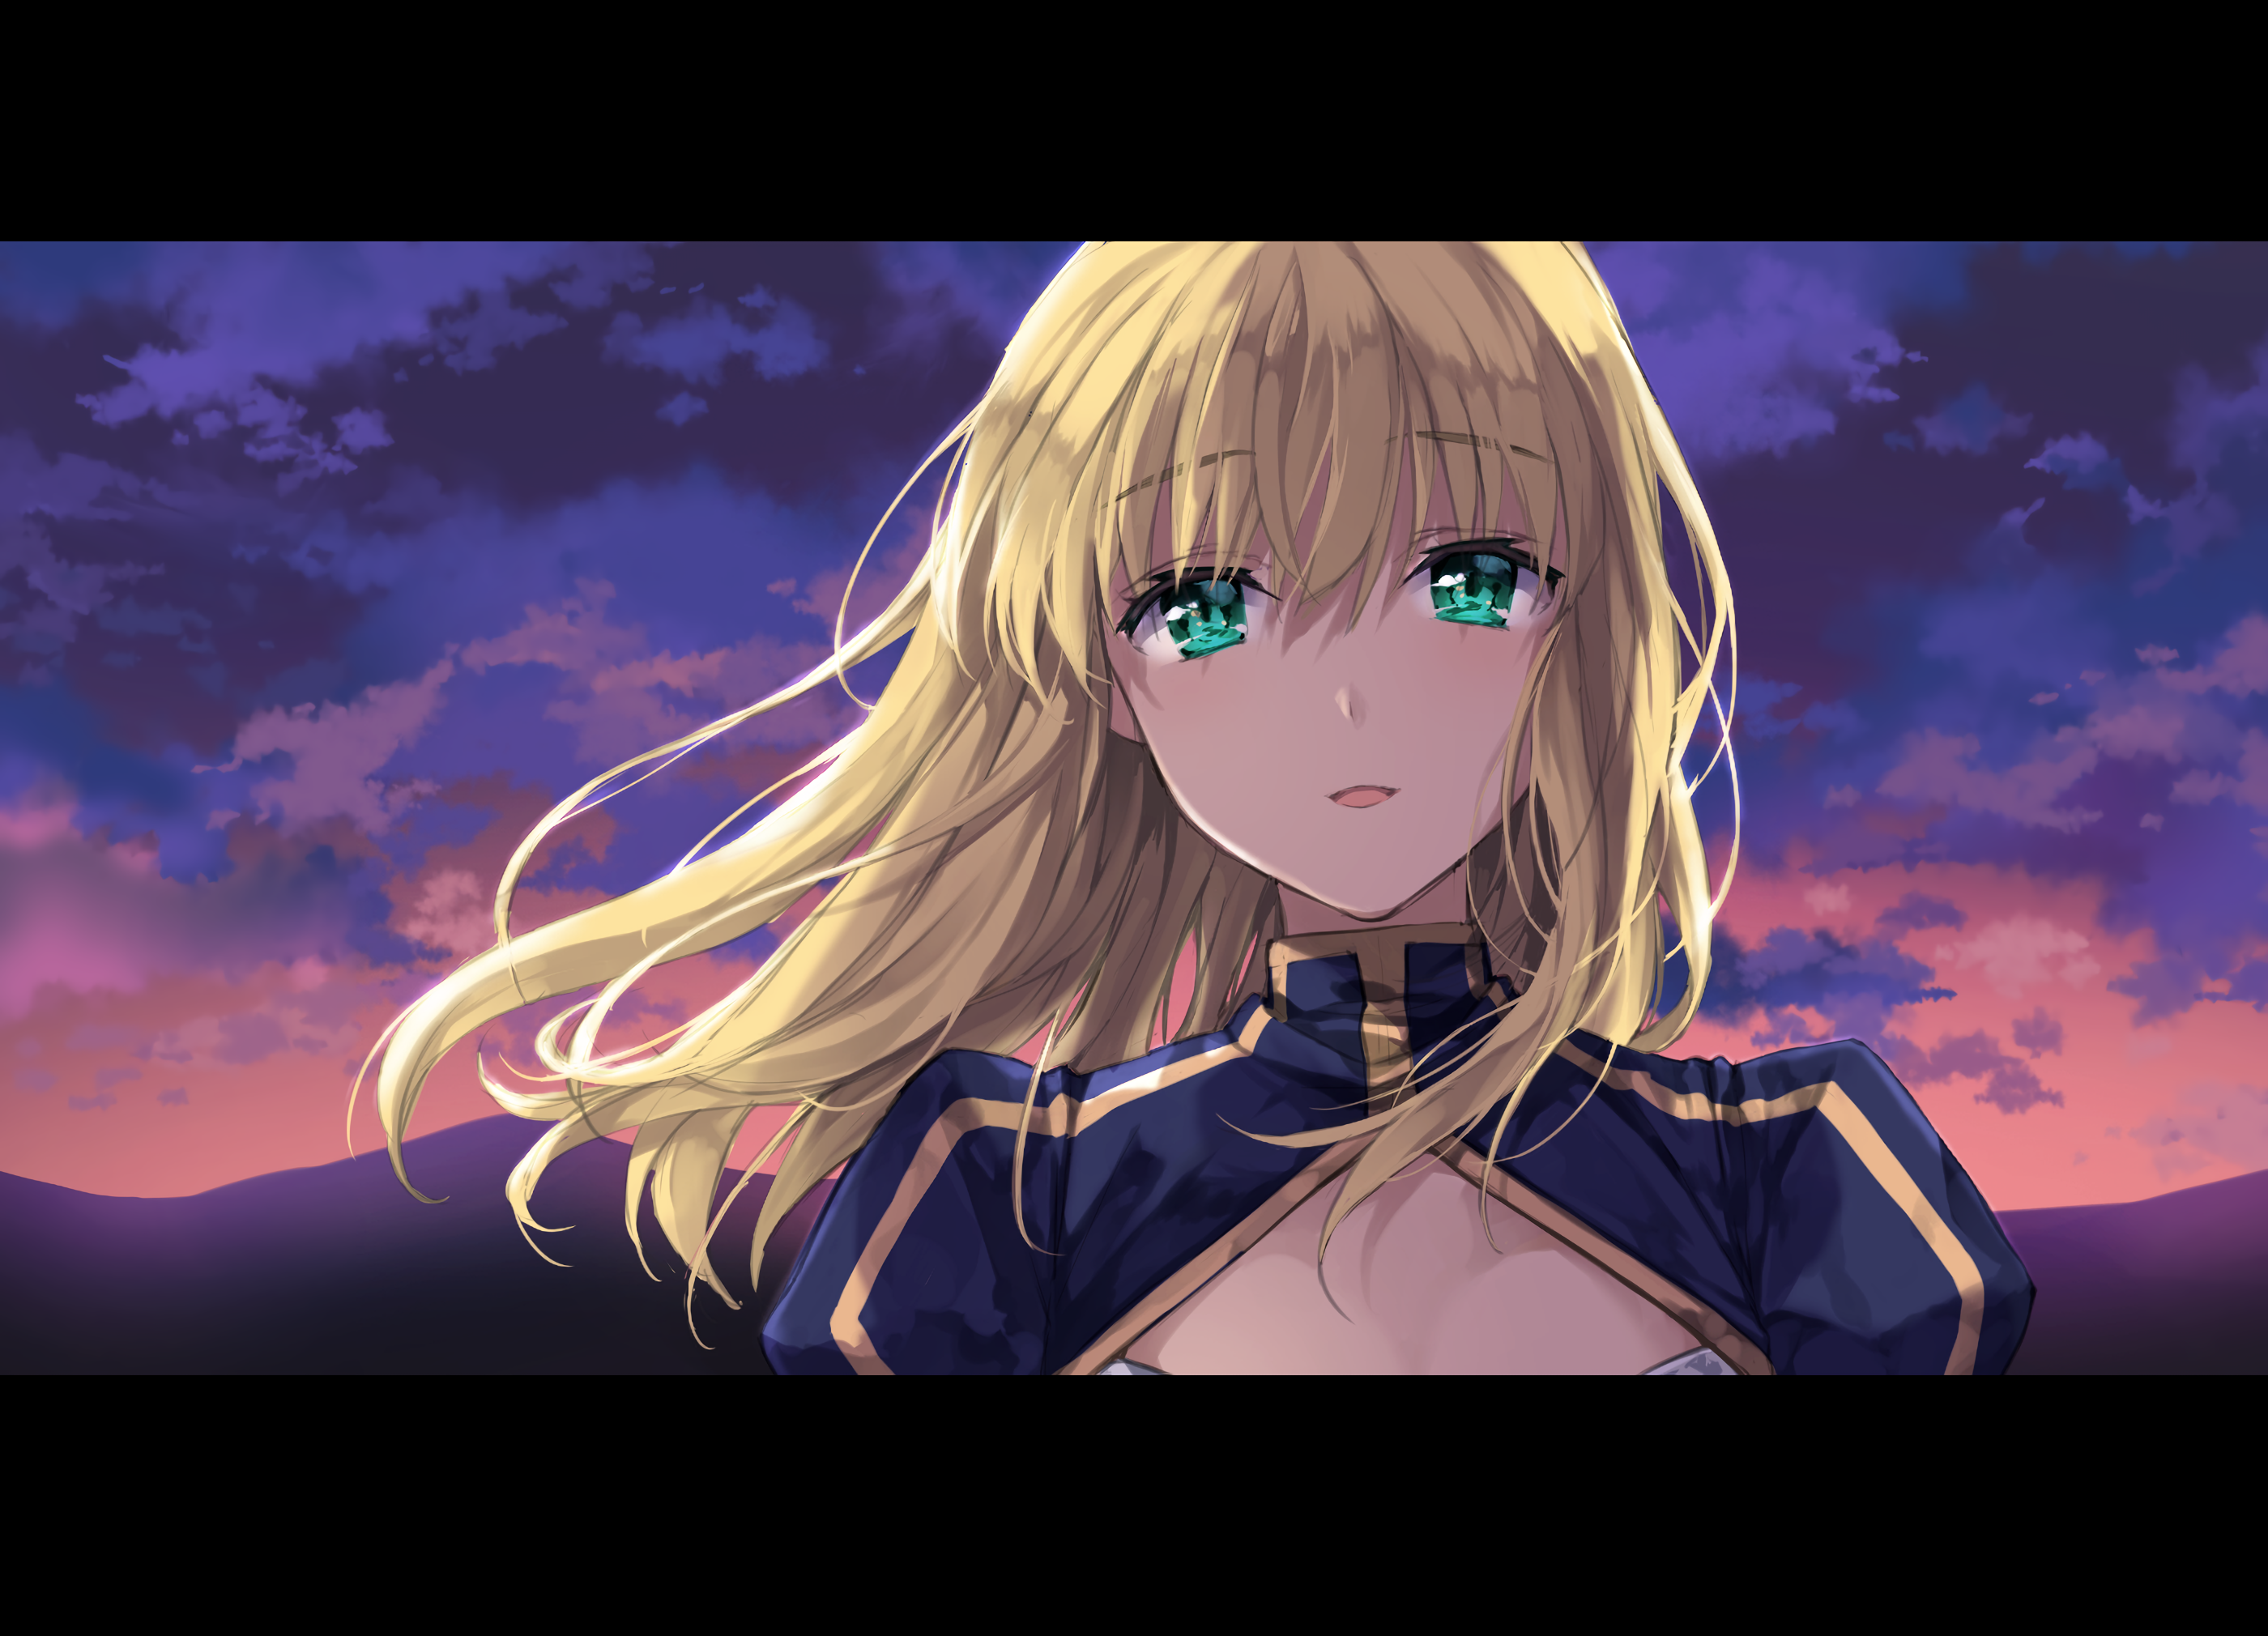 Anime 2800x2020 Fate series Fate/Zero Fate/Stay Night Fate/Grand Order Fate/Stay Night: Unlimited Blade Works anime girls 2D hair blowing in the wind long hair looking at viewer Saber Artoria Pendragon bangs anime blue dress open mouth smiling evening sunset mountains blushing green eyes clouds alternate hairstyle fan art Ice (artist) blonde